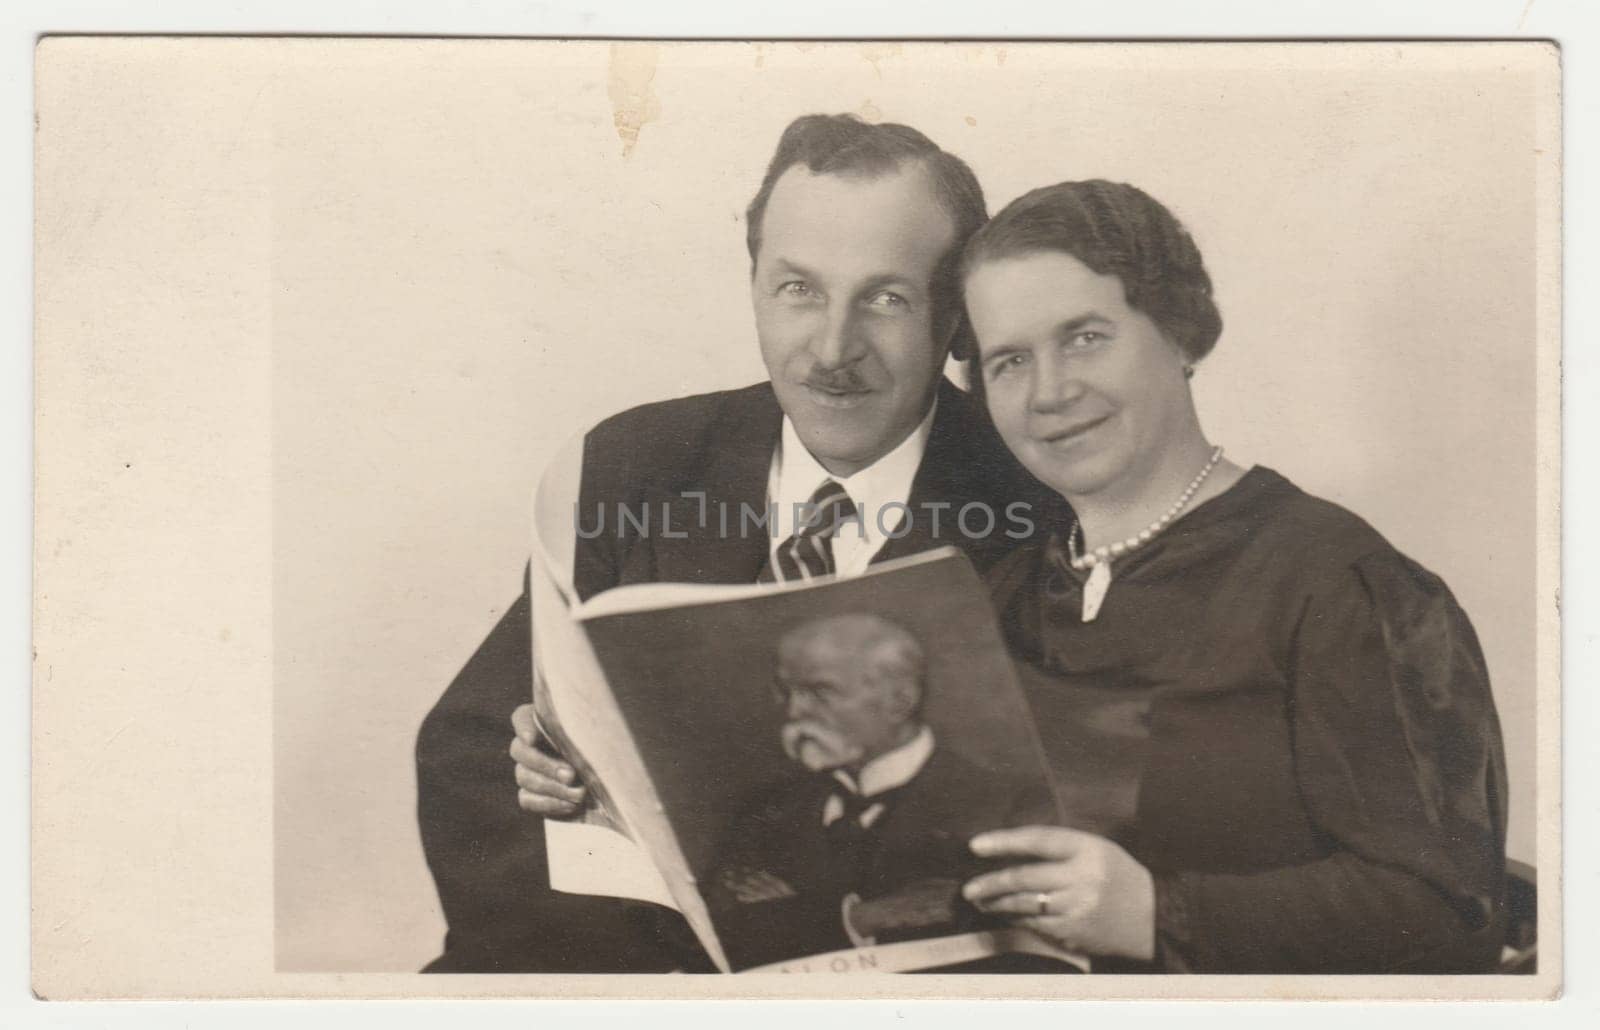 THE CZECHOSLOVAK REPUBLIC - CIRCA 1935: Vintage photo shows a marital couple pose with magazine. The cover page of magazine shows Masaryk - the first Czechoslovak president. Retro black and white photography. Circa 1930s.